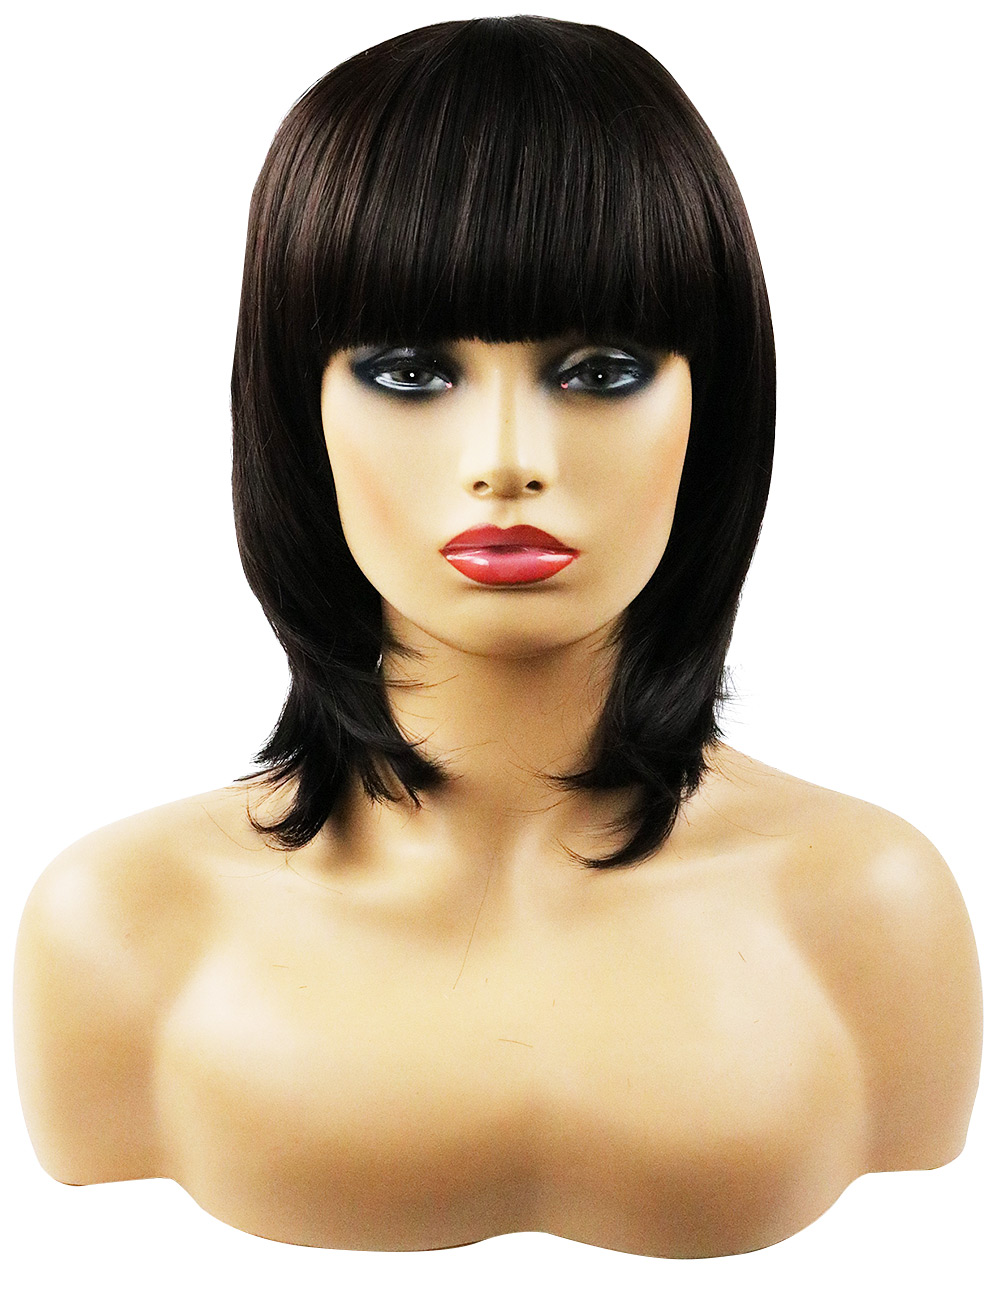 Layered Shag Hairstyle with Full Fringe Middle Length Synthetic Capless Women Wigs